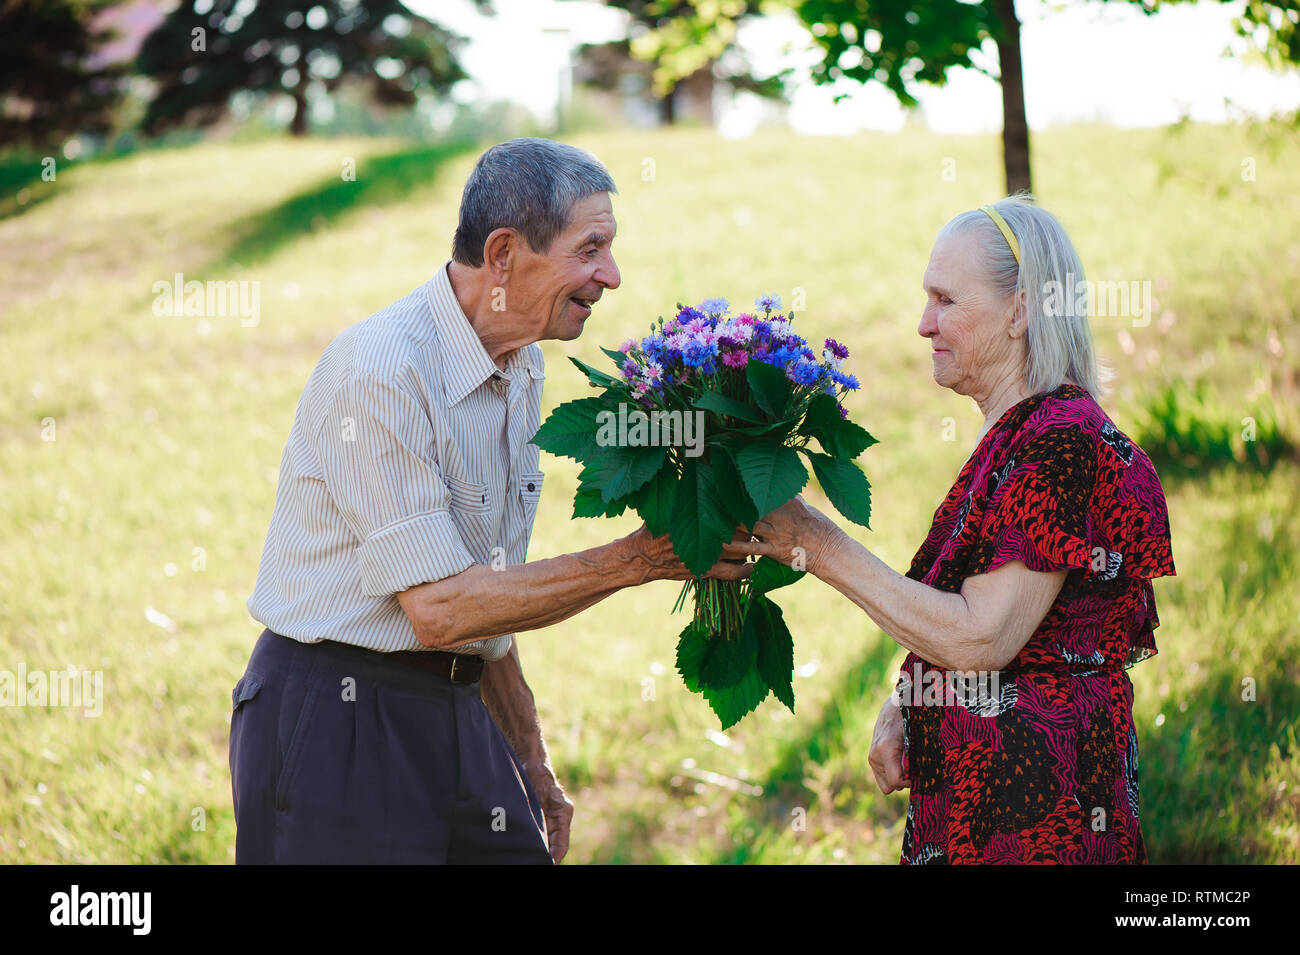 An Elderly Man Of 80 Years Old Gives Flowers To His Wife In A Summer